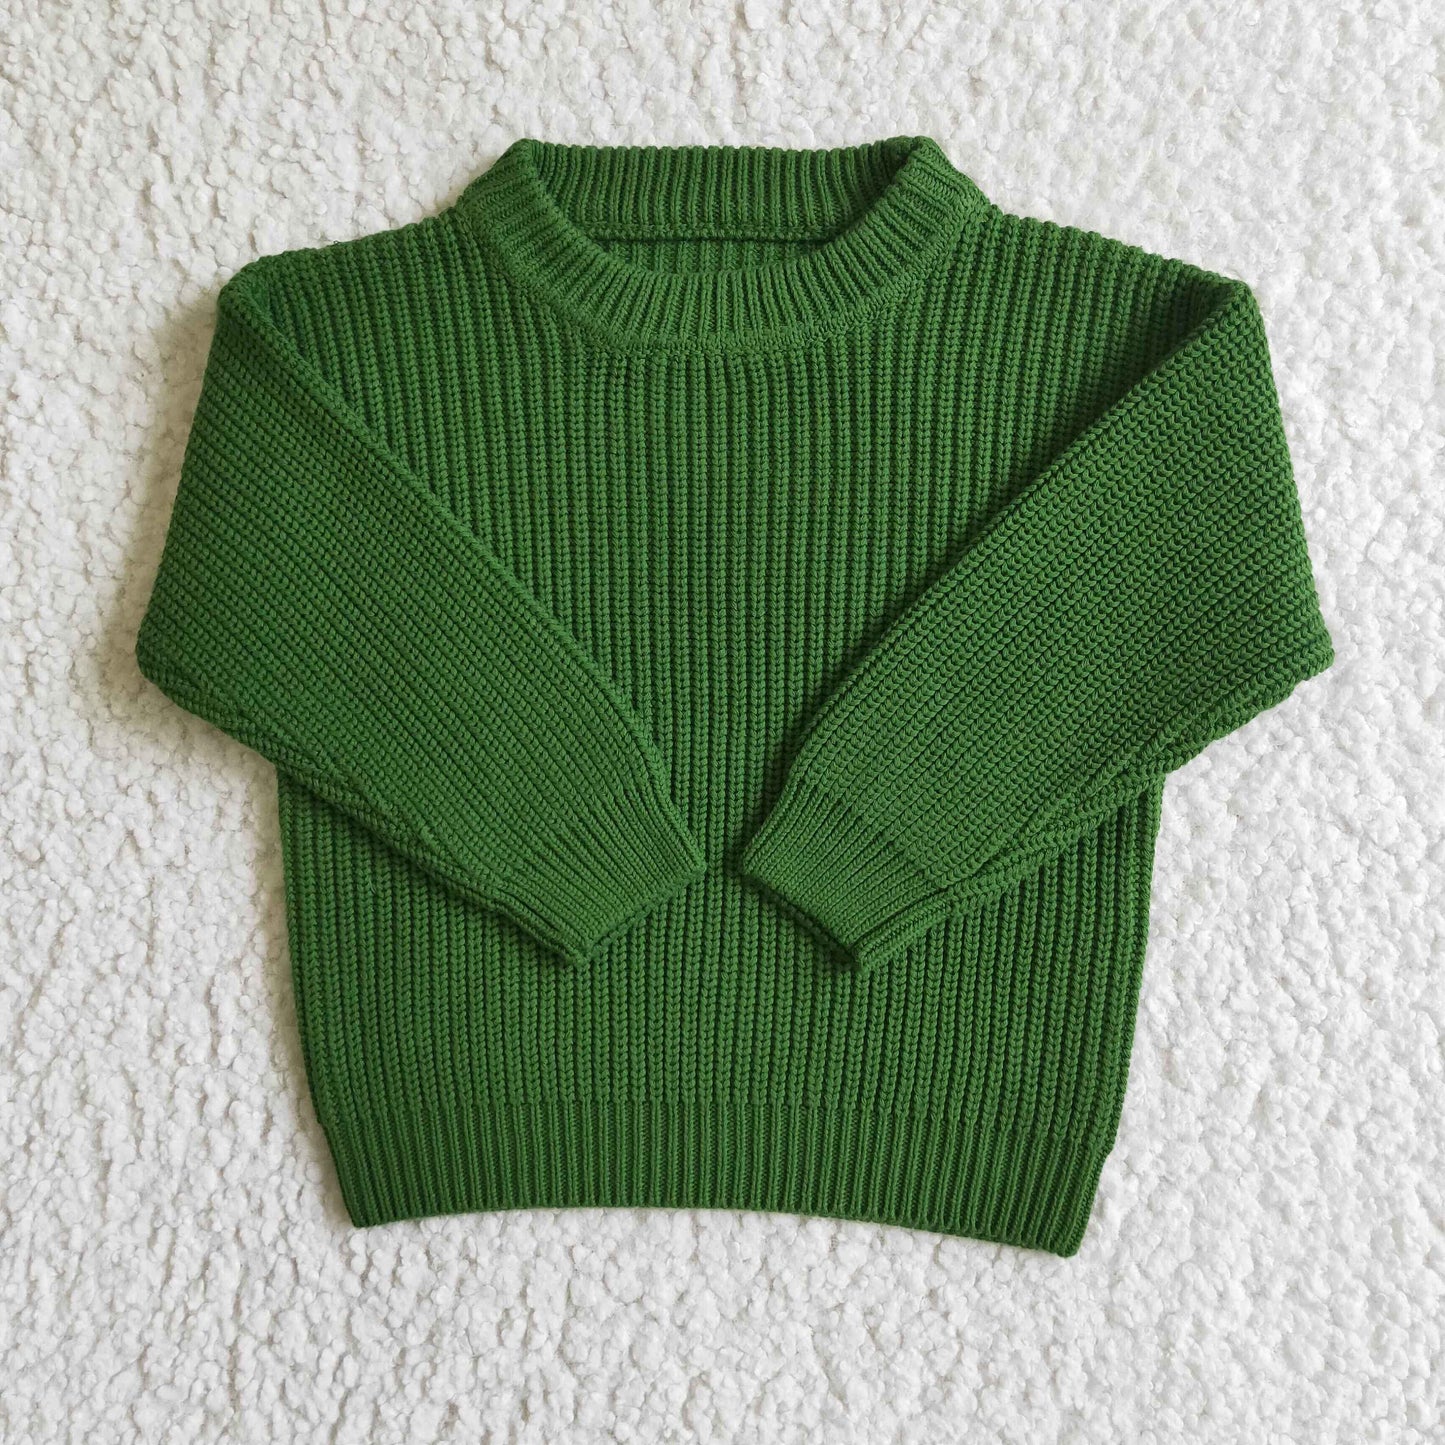 Olive cotton winter sweater